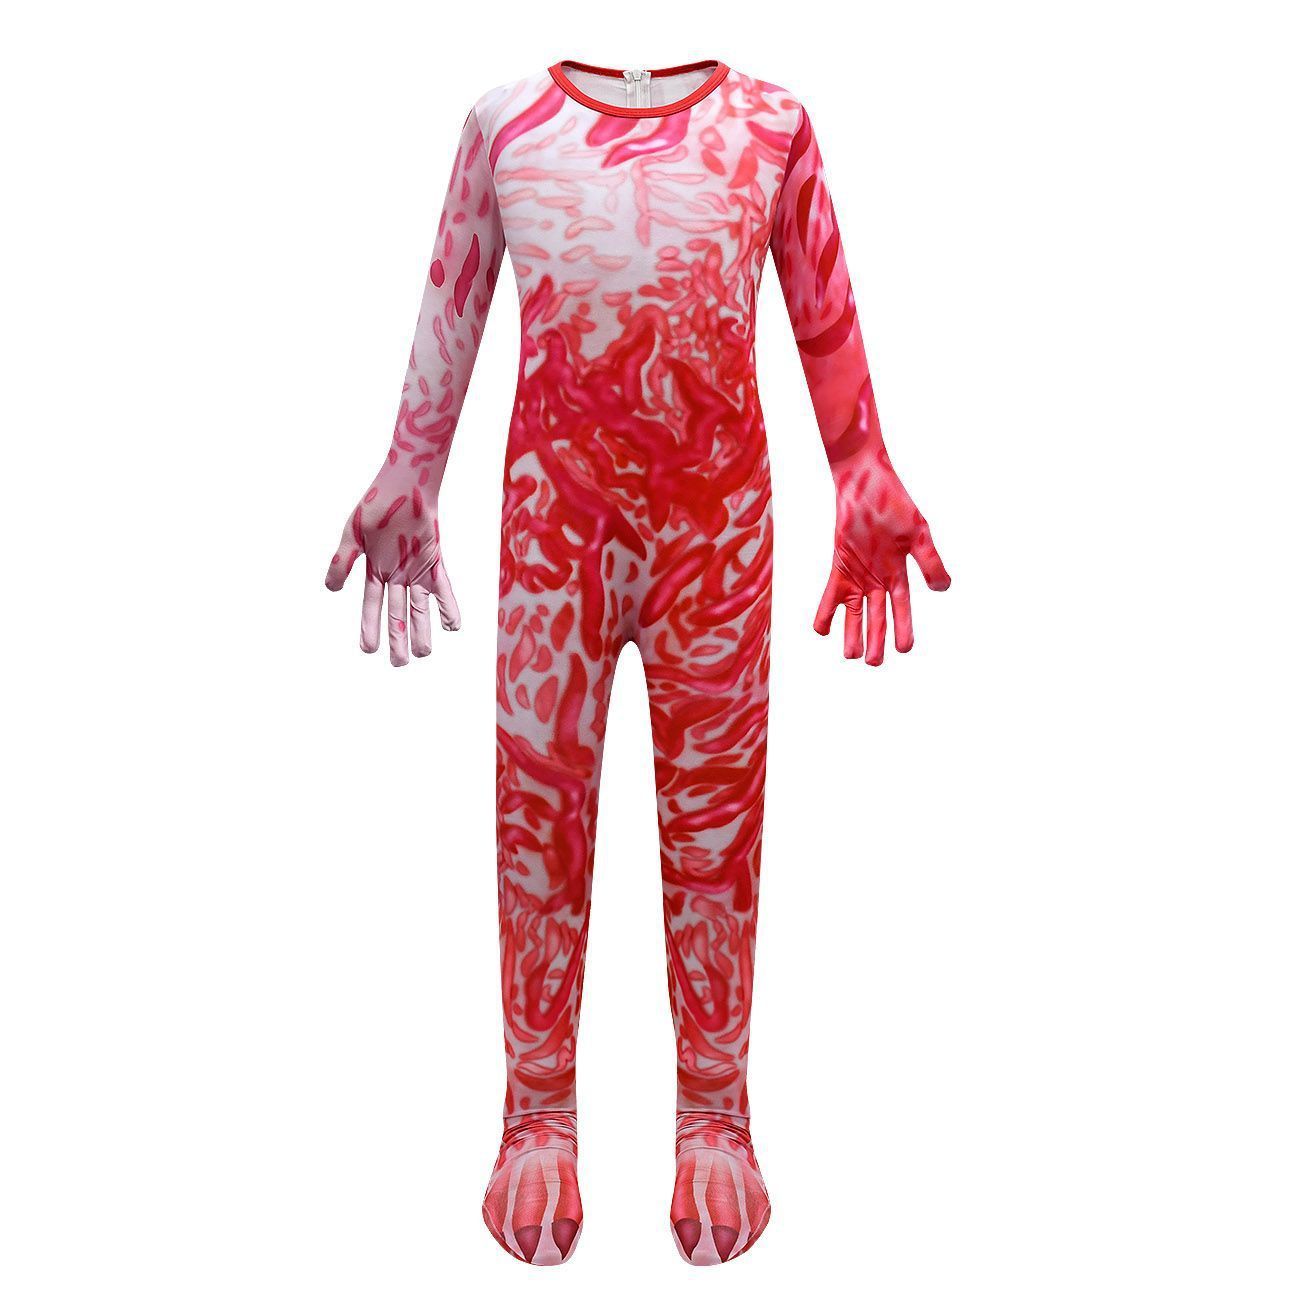 Stranger Things 4 red Cosplay Costumes Jumpsuit Romper Halloween Outfit For Kids